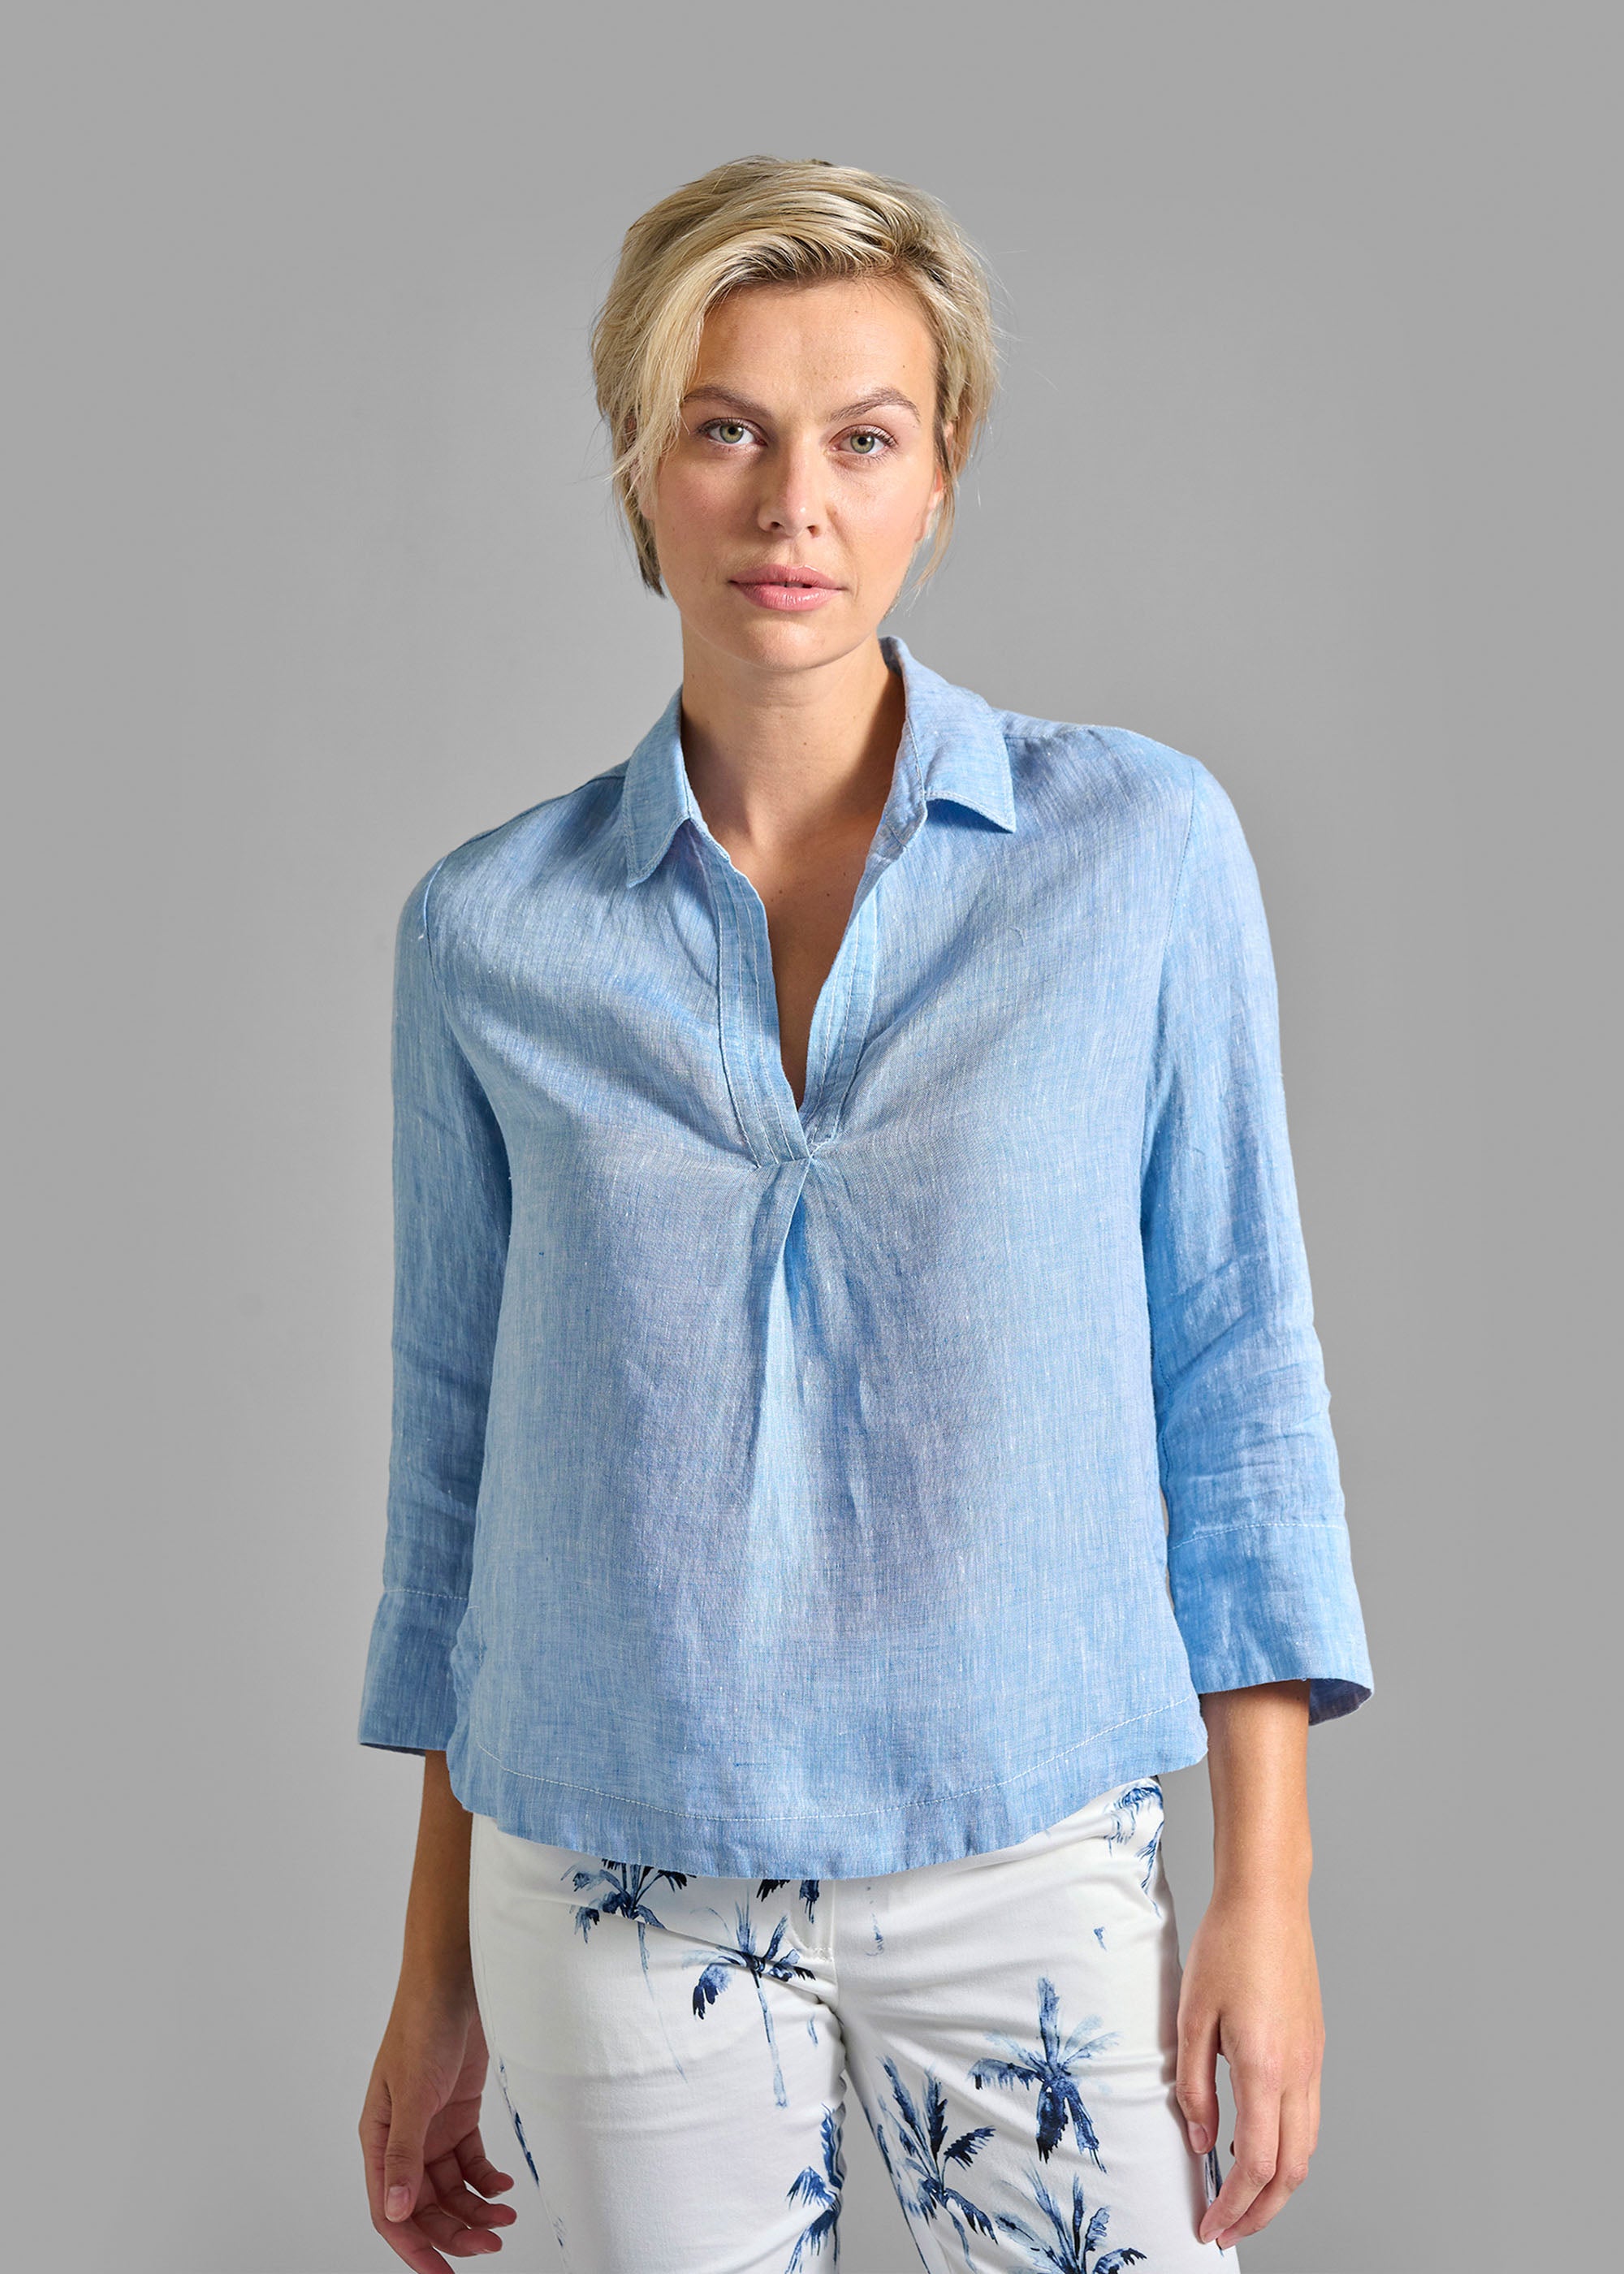 Bluse Modell "Wendy"